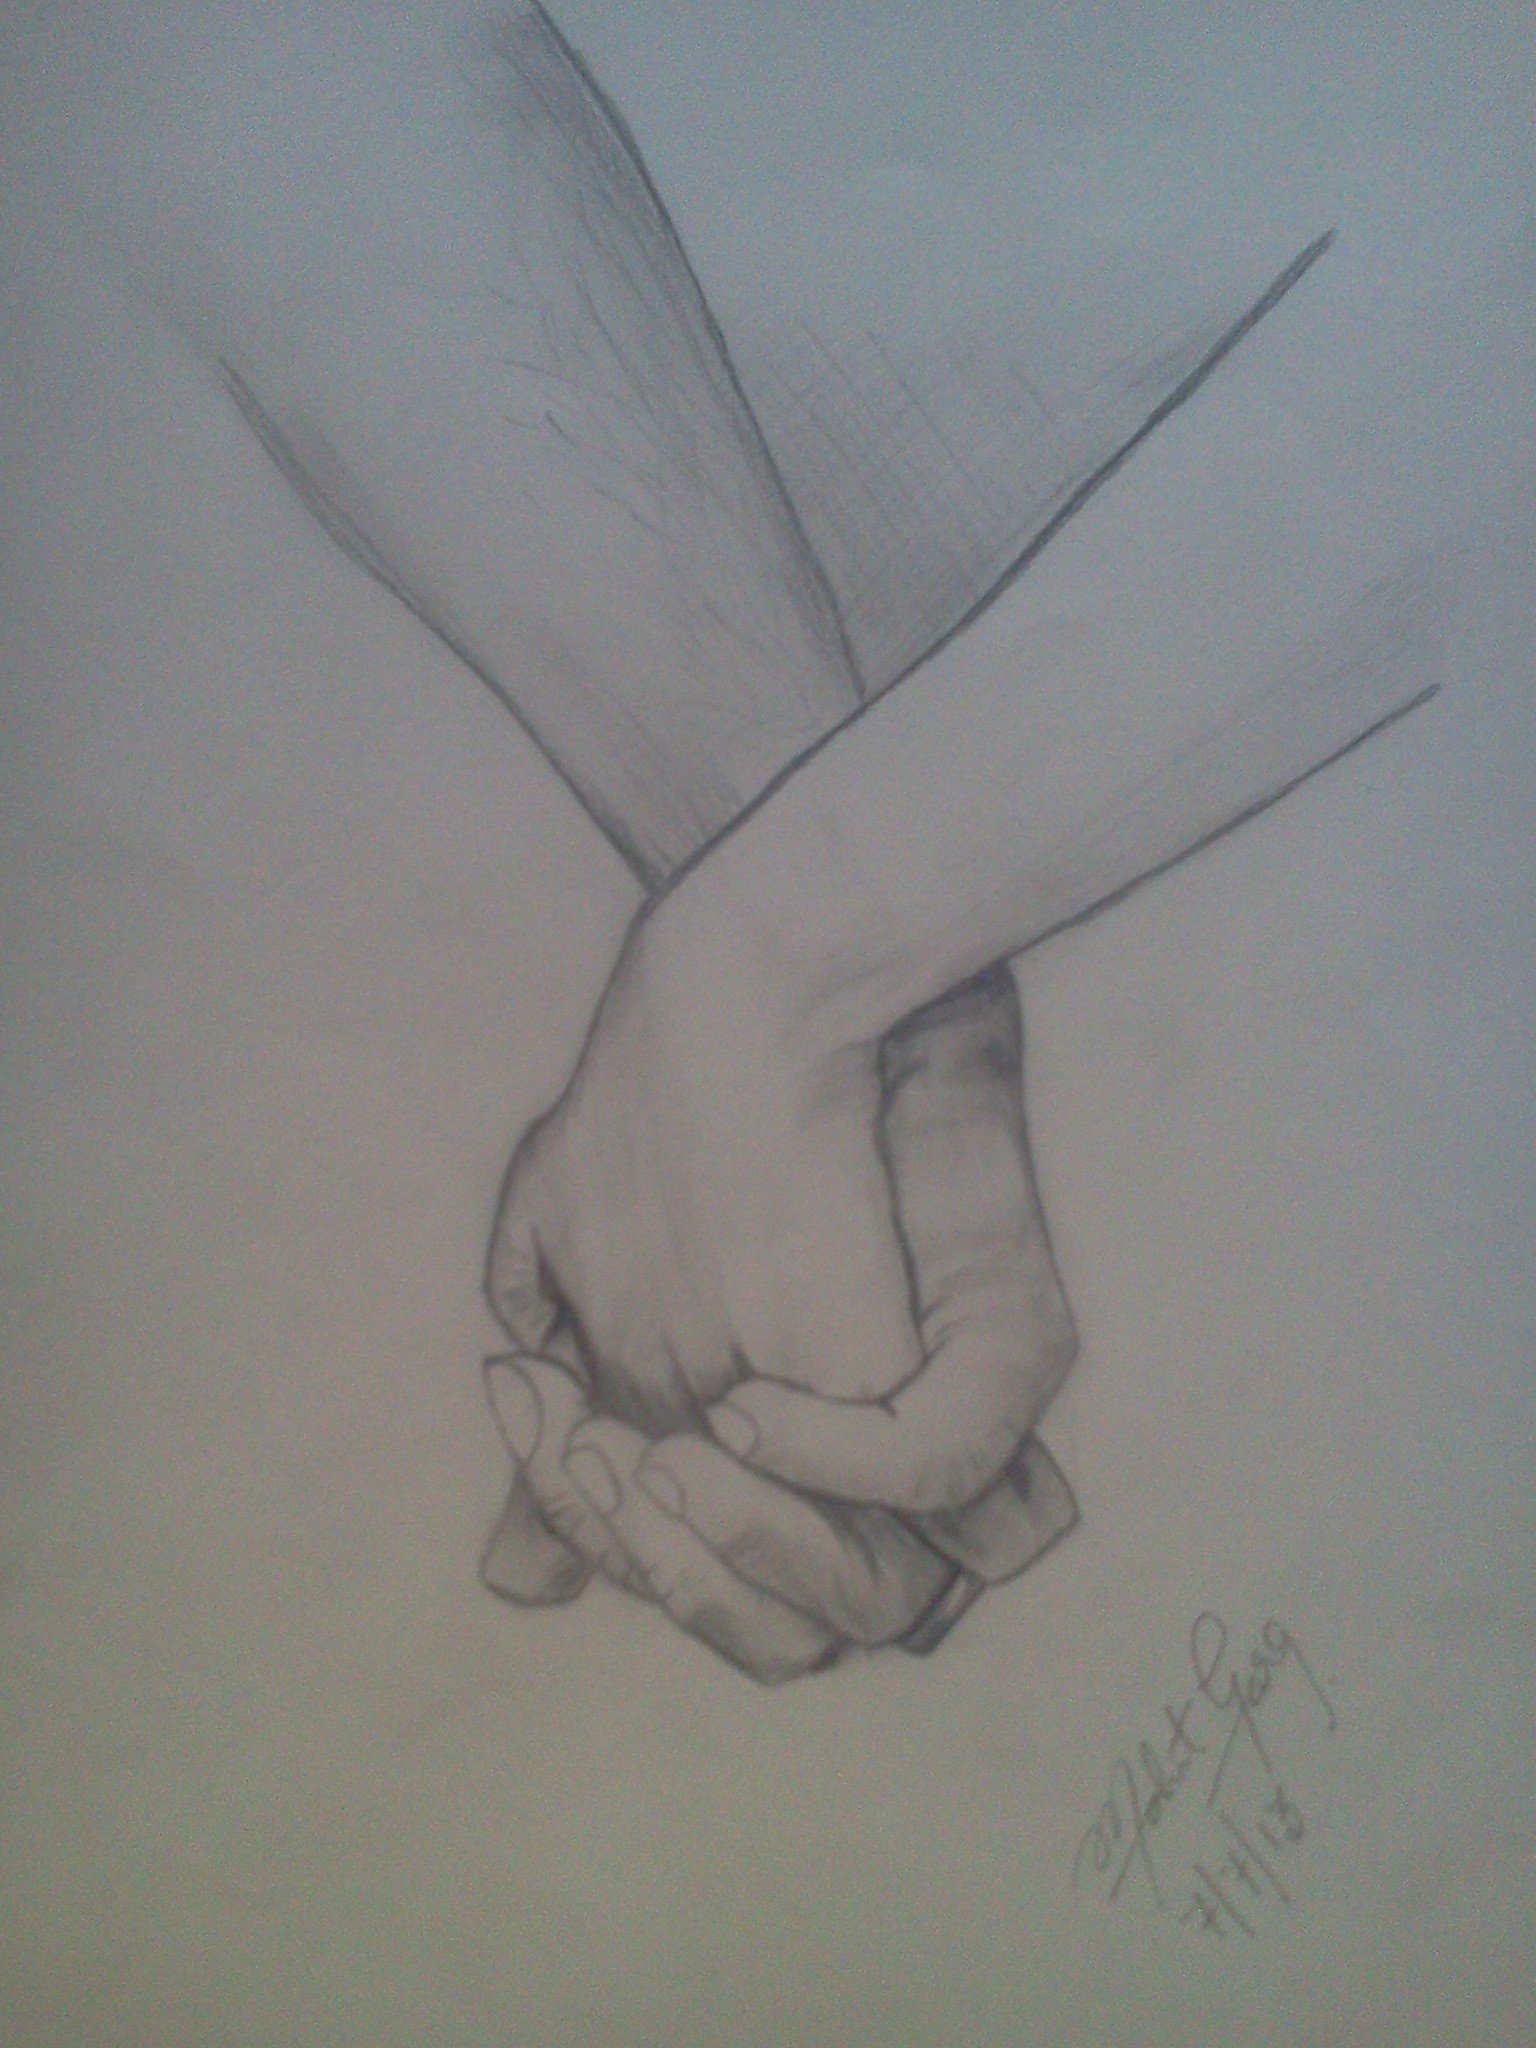 Pencil Sketches Of Love at PaintingValley.com | Explore ...